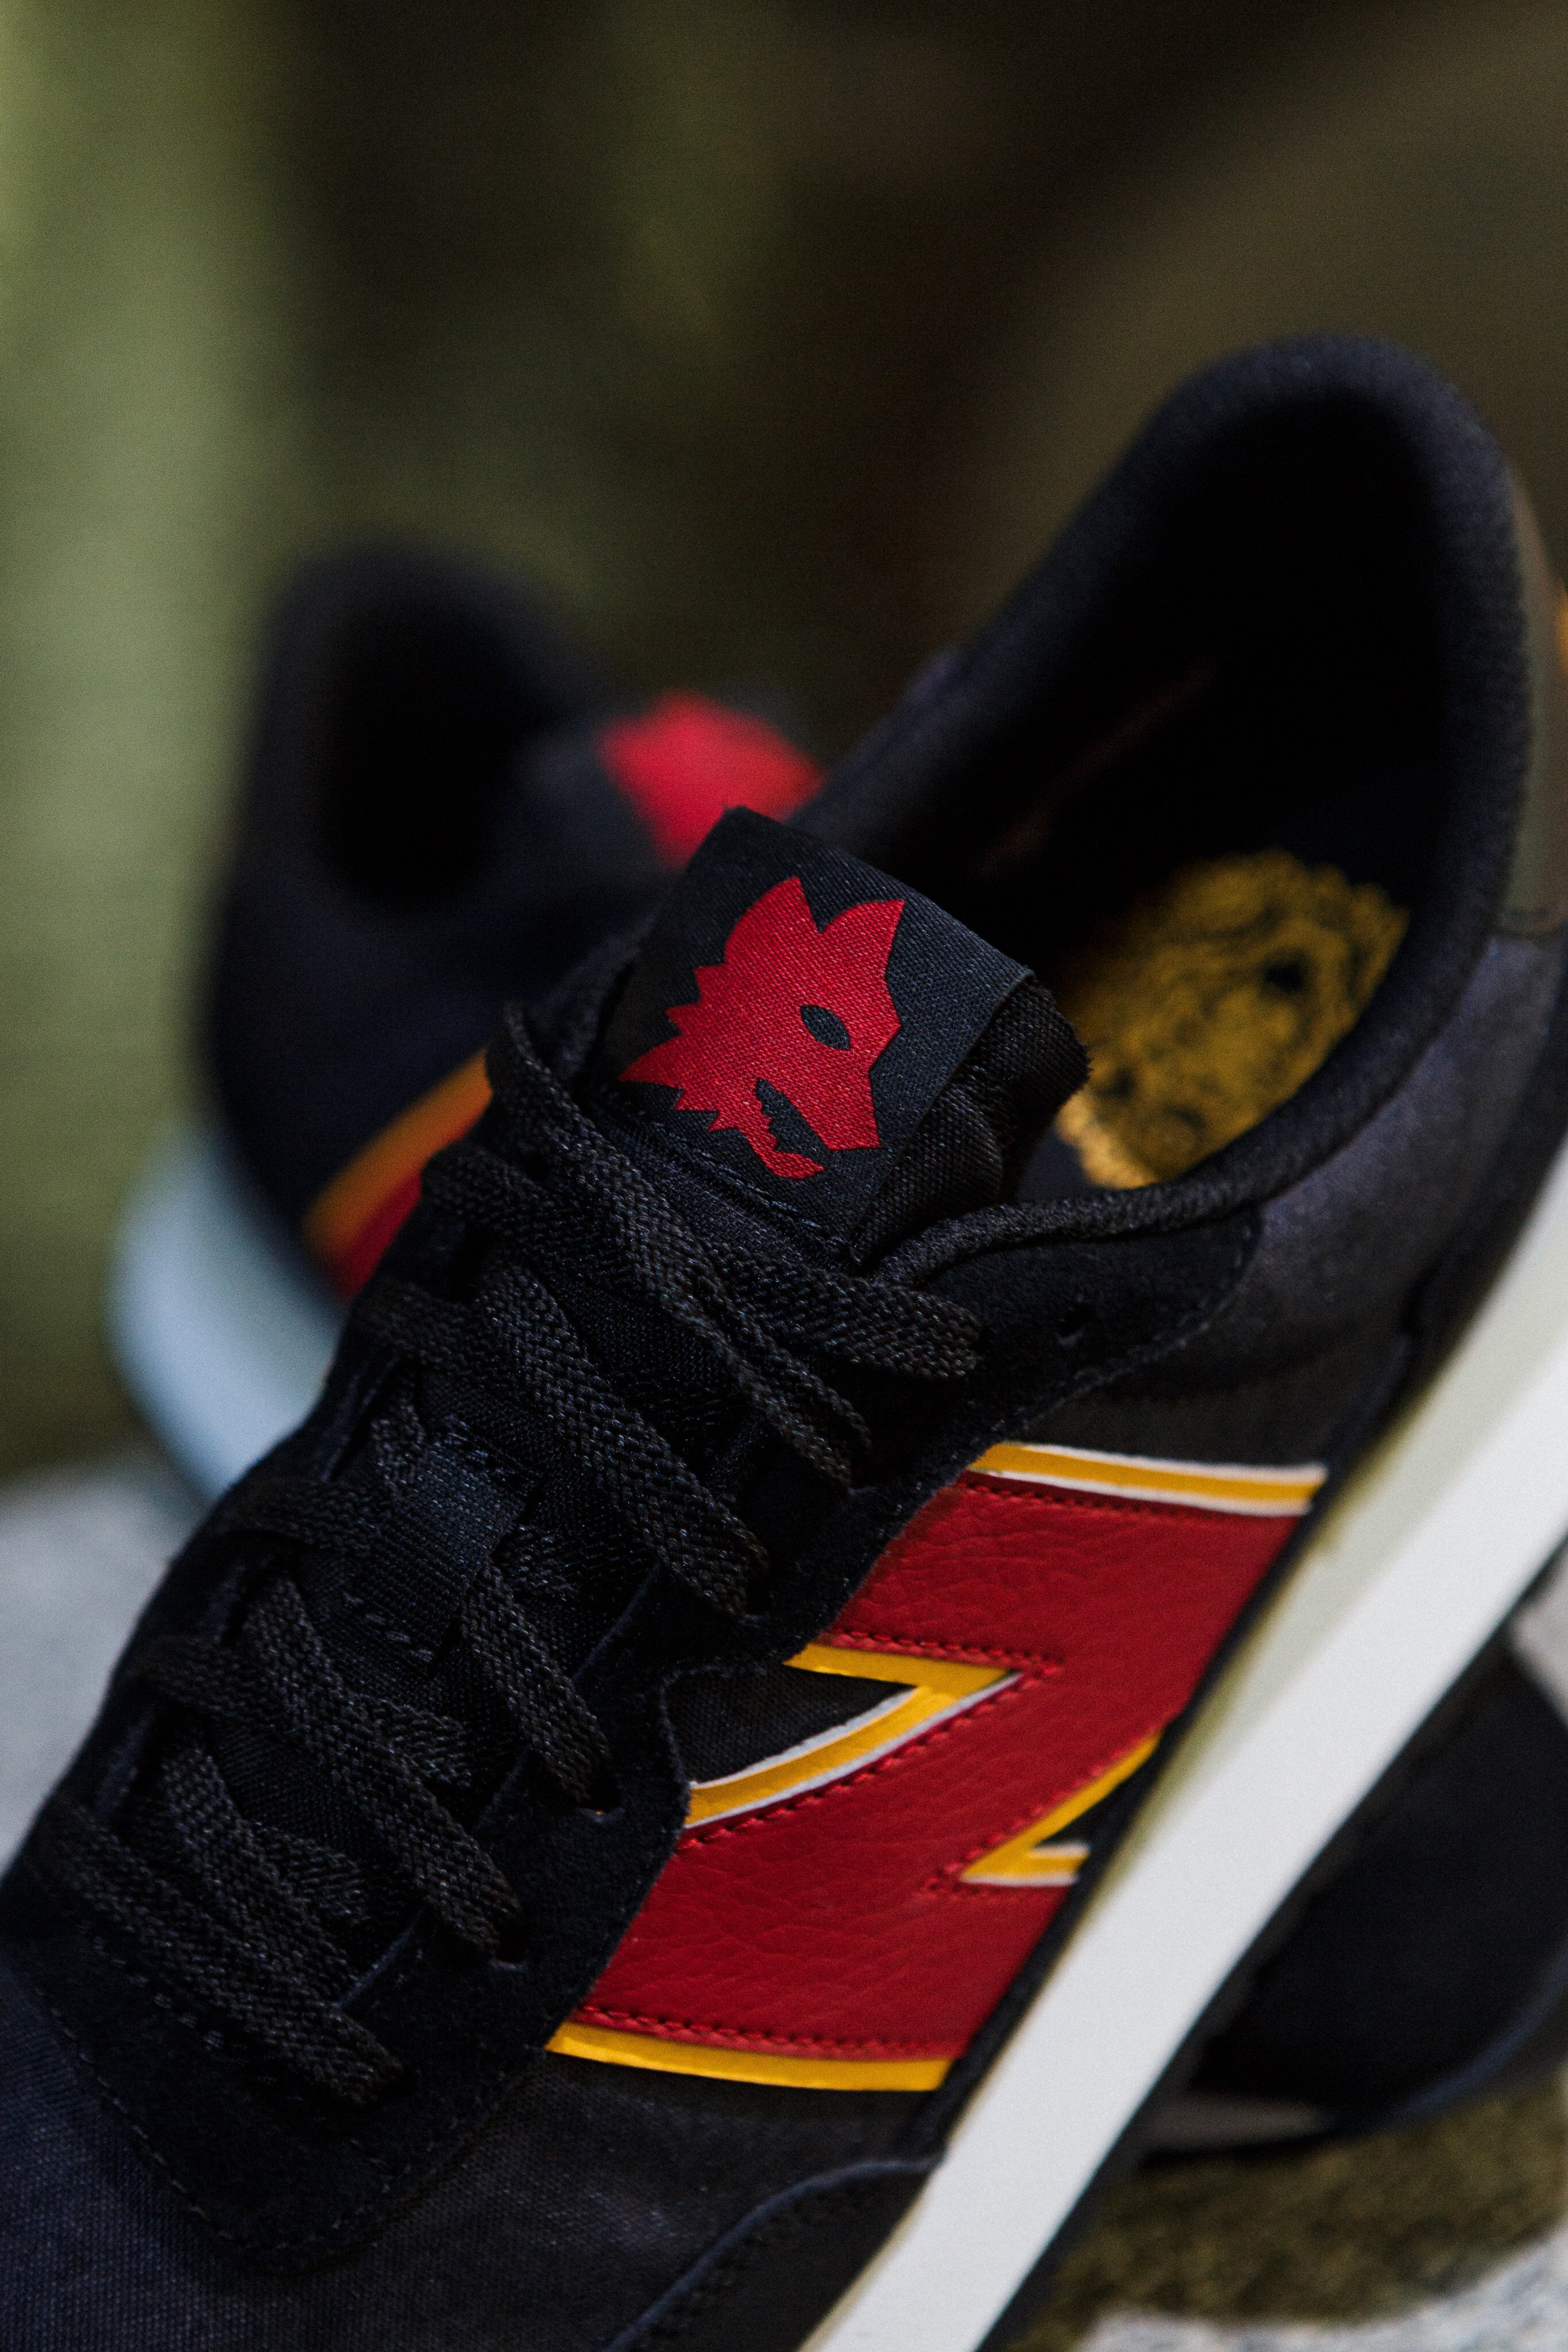 New Balance has partnered with Italian soccer club AS Roma to create the New Balance 237 sneaker for Lunar New Year 2022. The club’s wolf logo is on the shoe and the insoles feature a golden tiger face. Here is the ultimate guide to Year of the Tiger sneakers. Photo: Handout